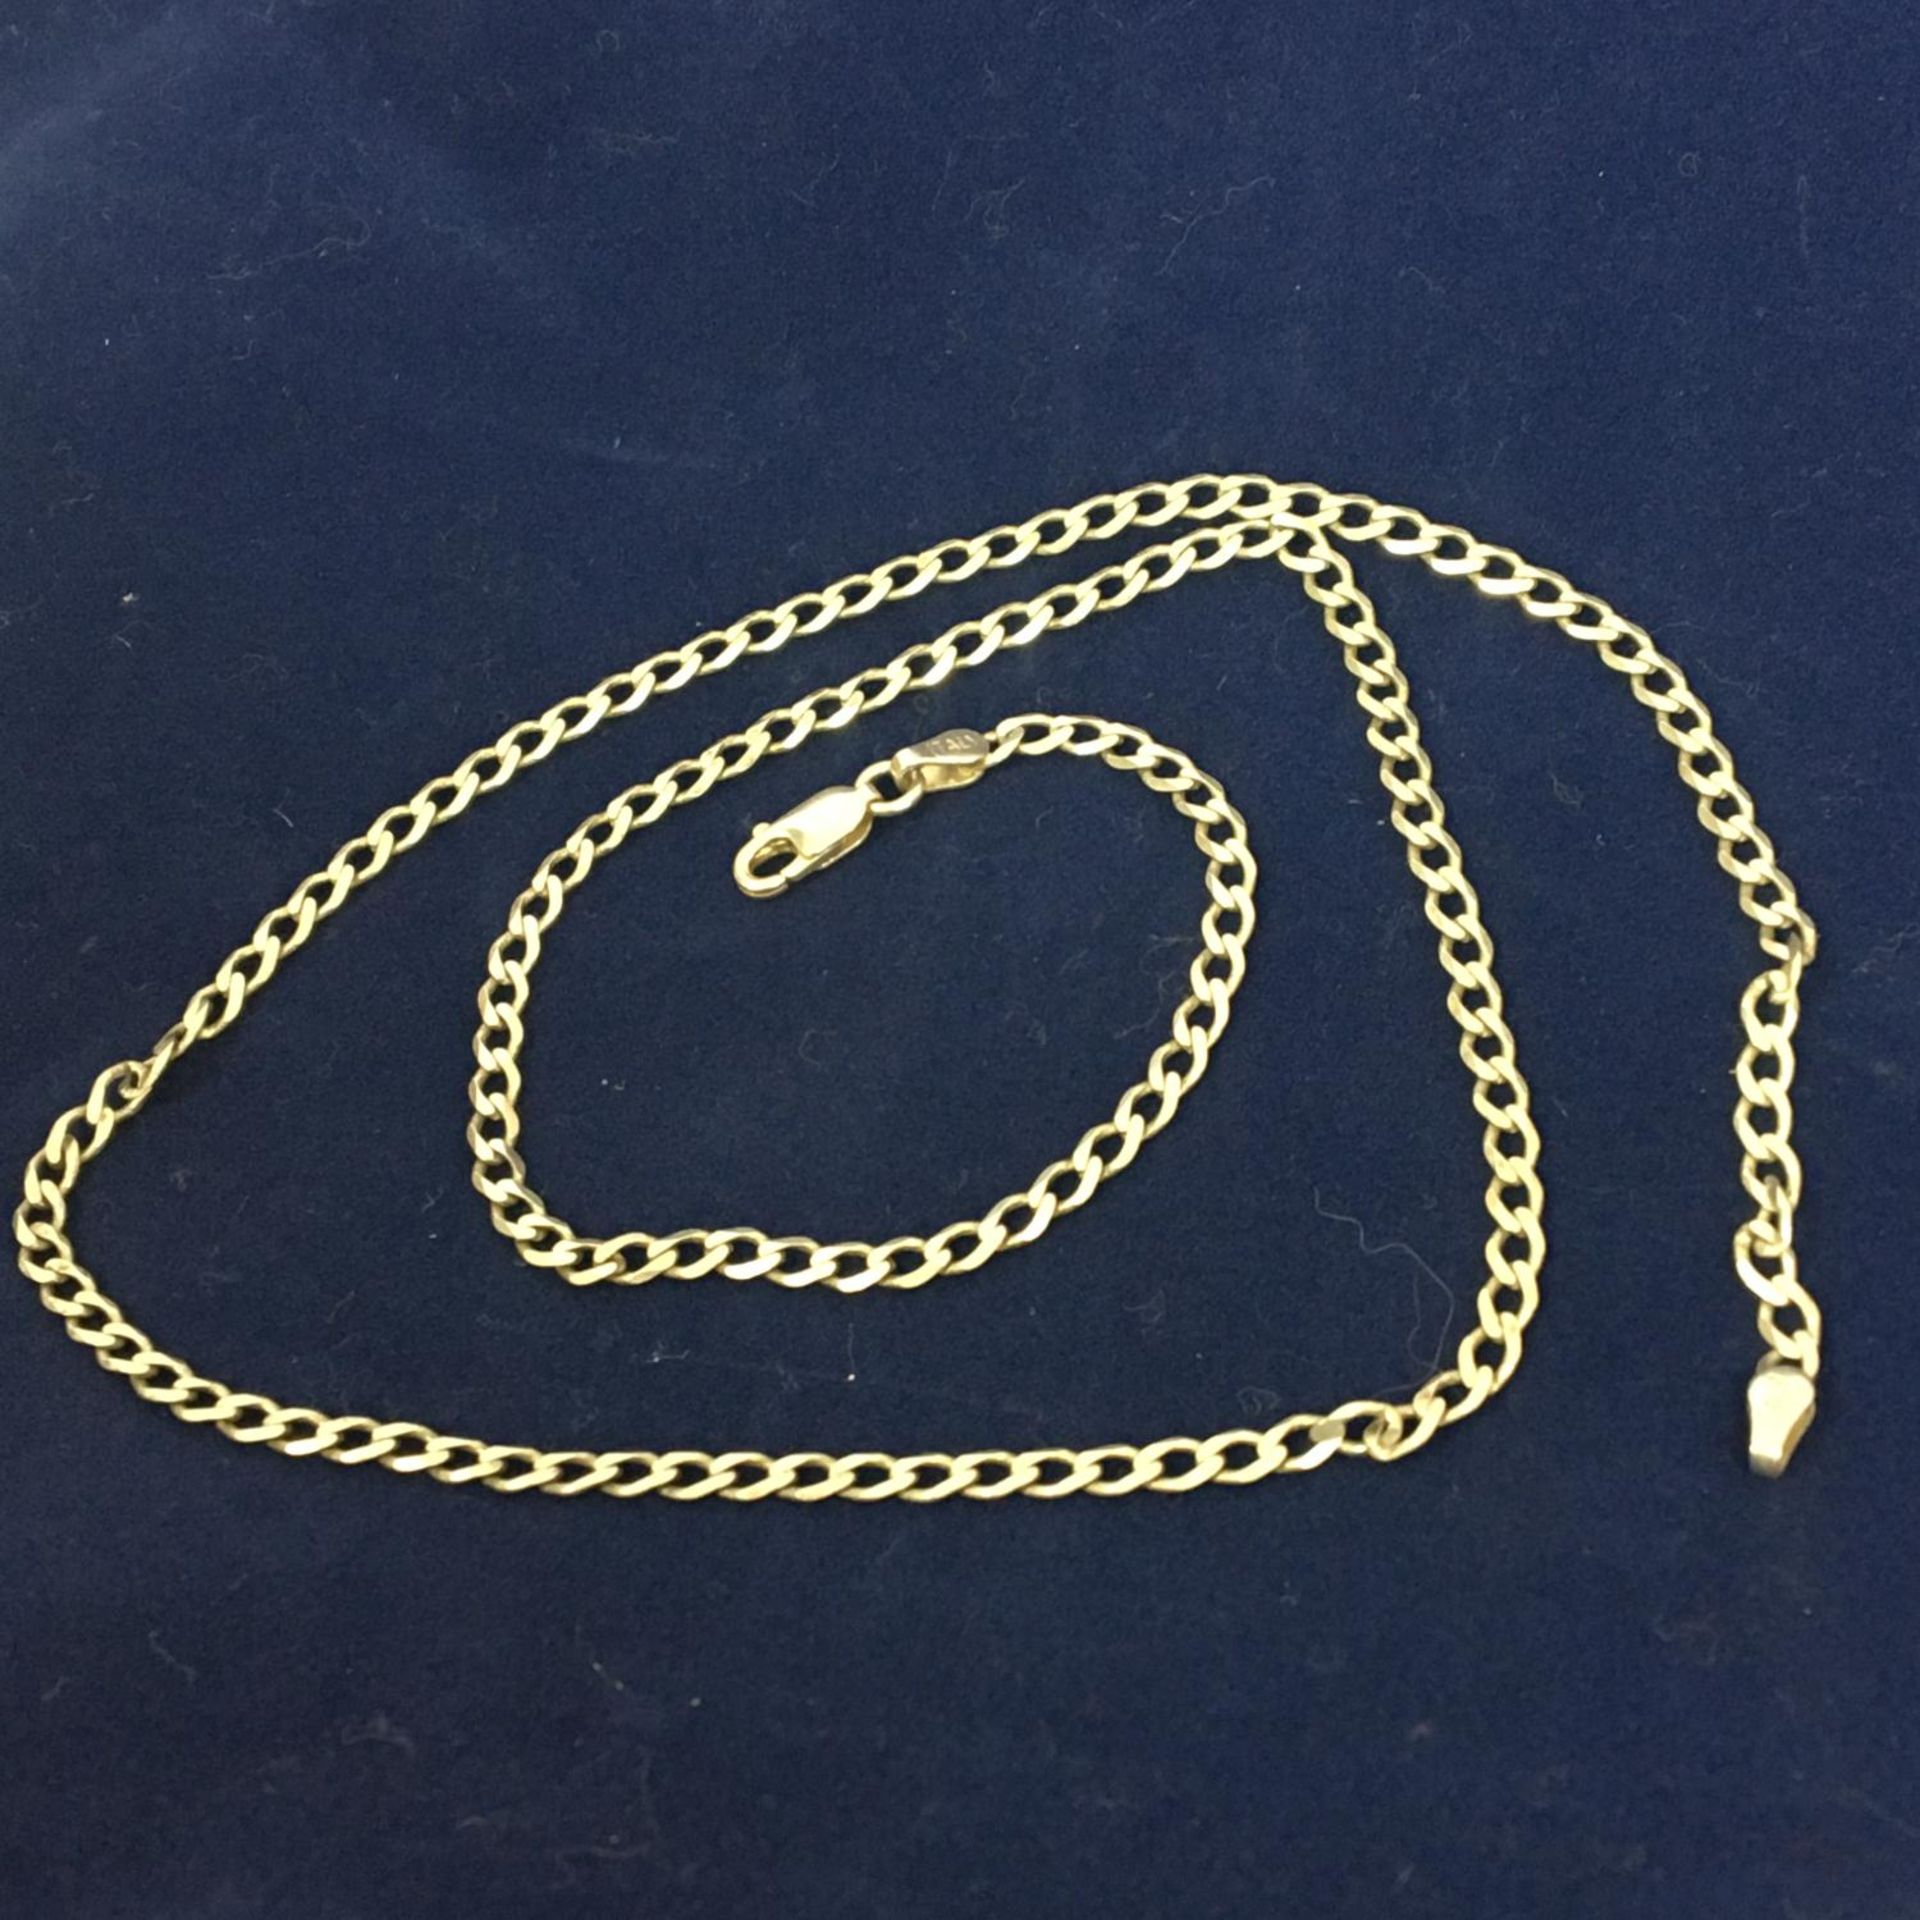 Pre-Owned - A gentleman's Italian 925 silver chain, 20 inches